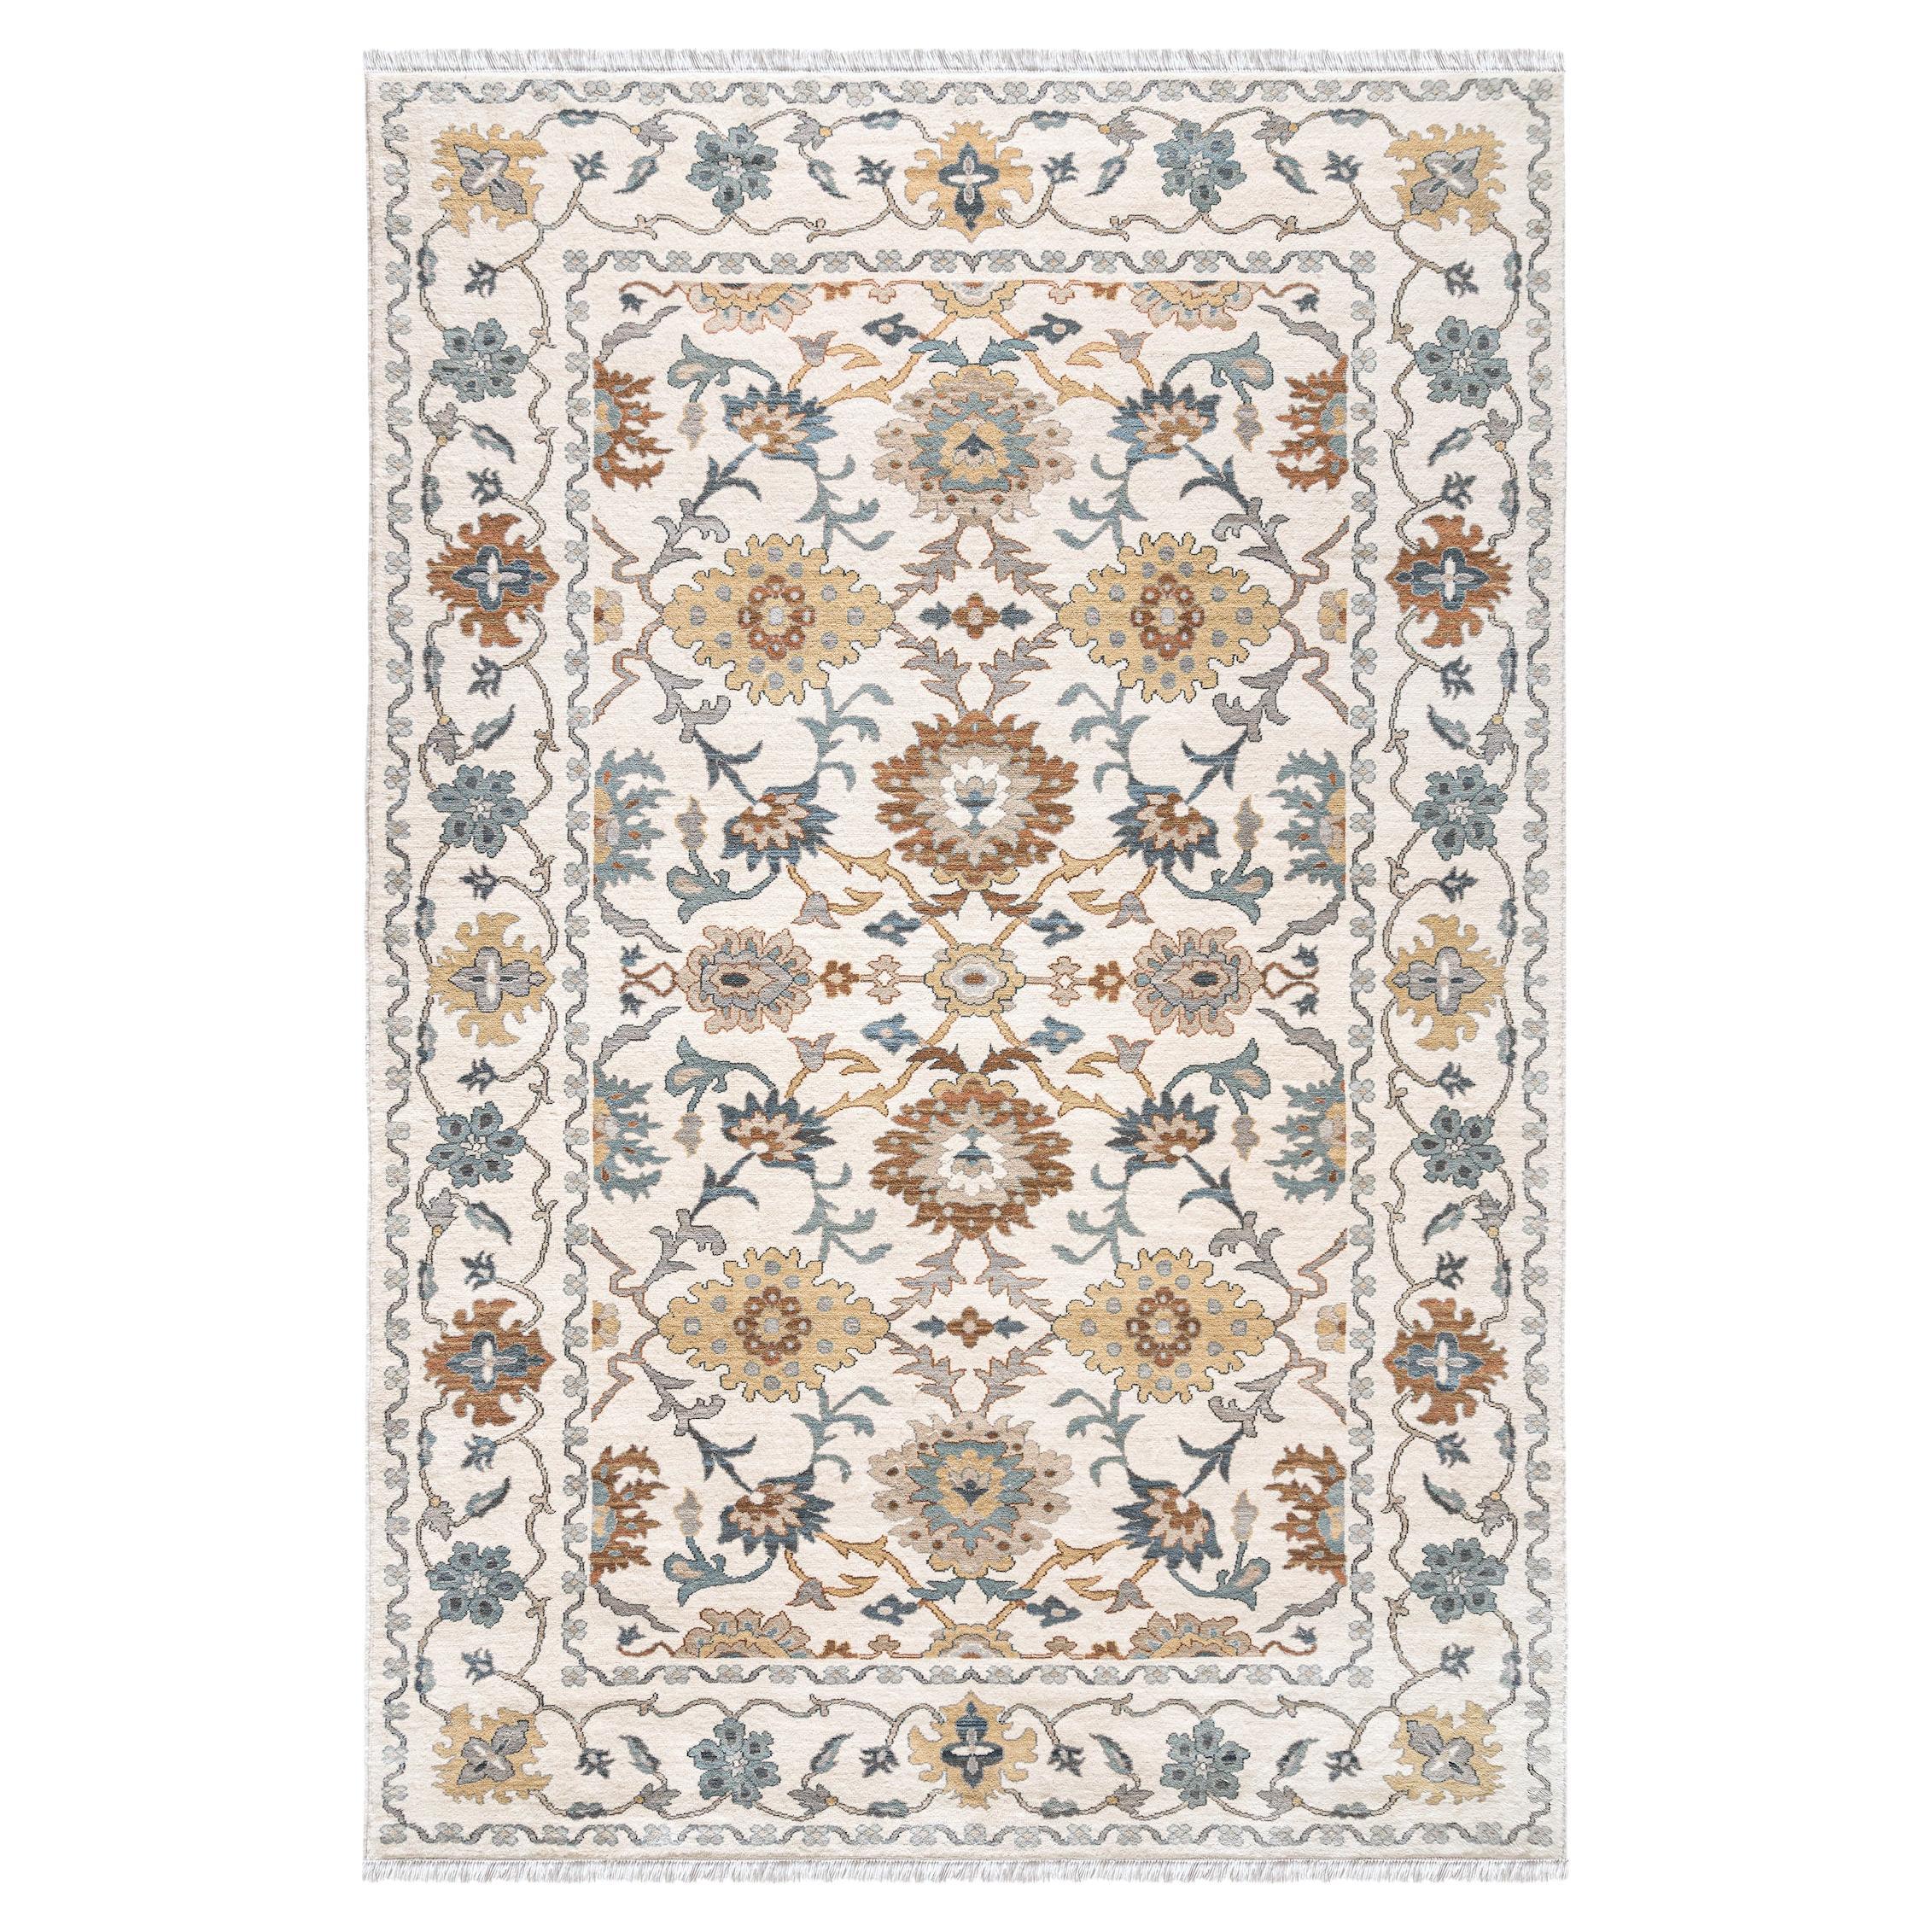 21st Century Hand-Knotted Egyptian Ziegler Rug in Beige Blue Floral Pattern For Sale